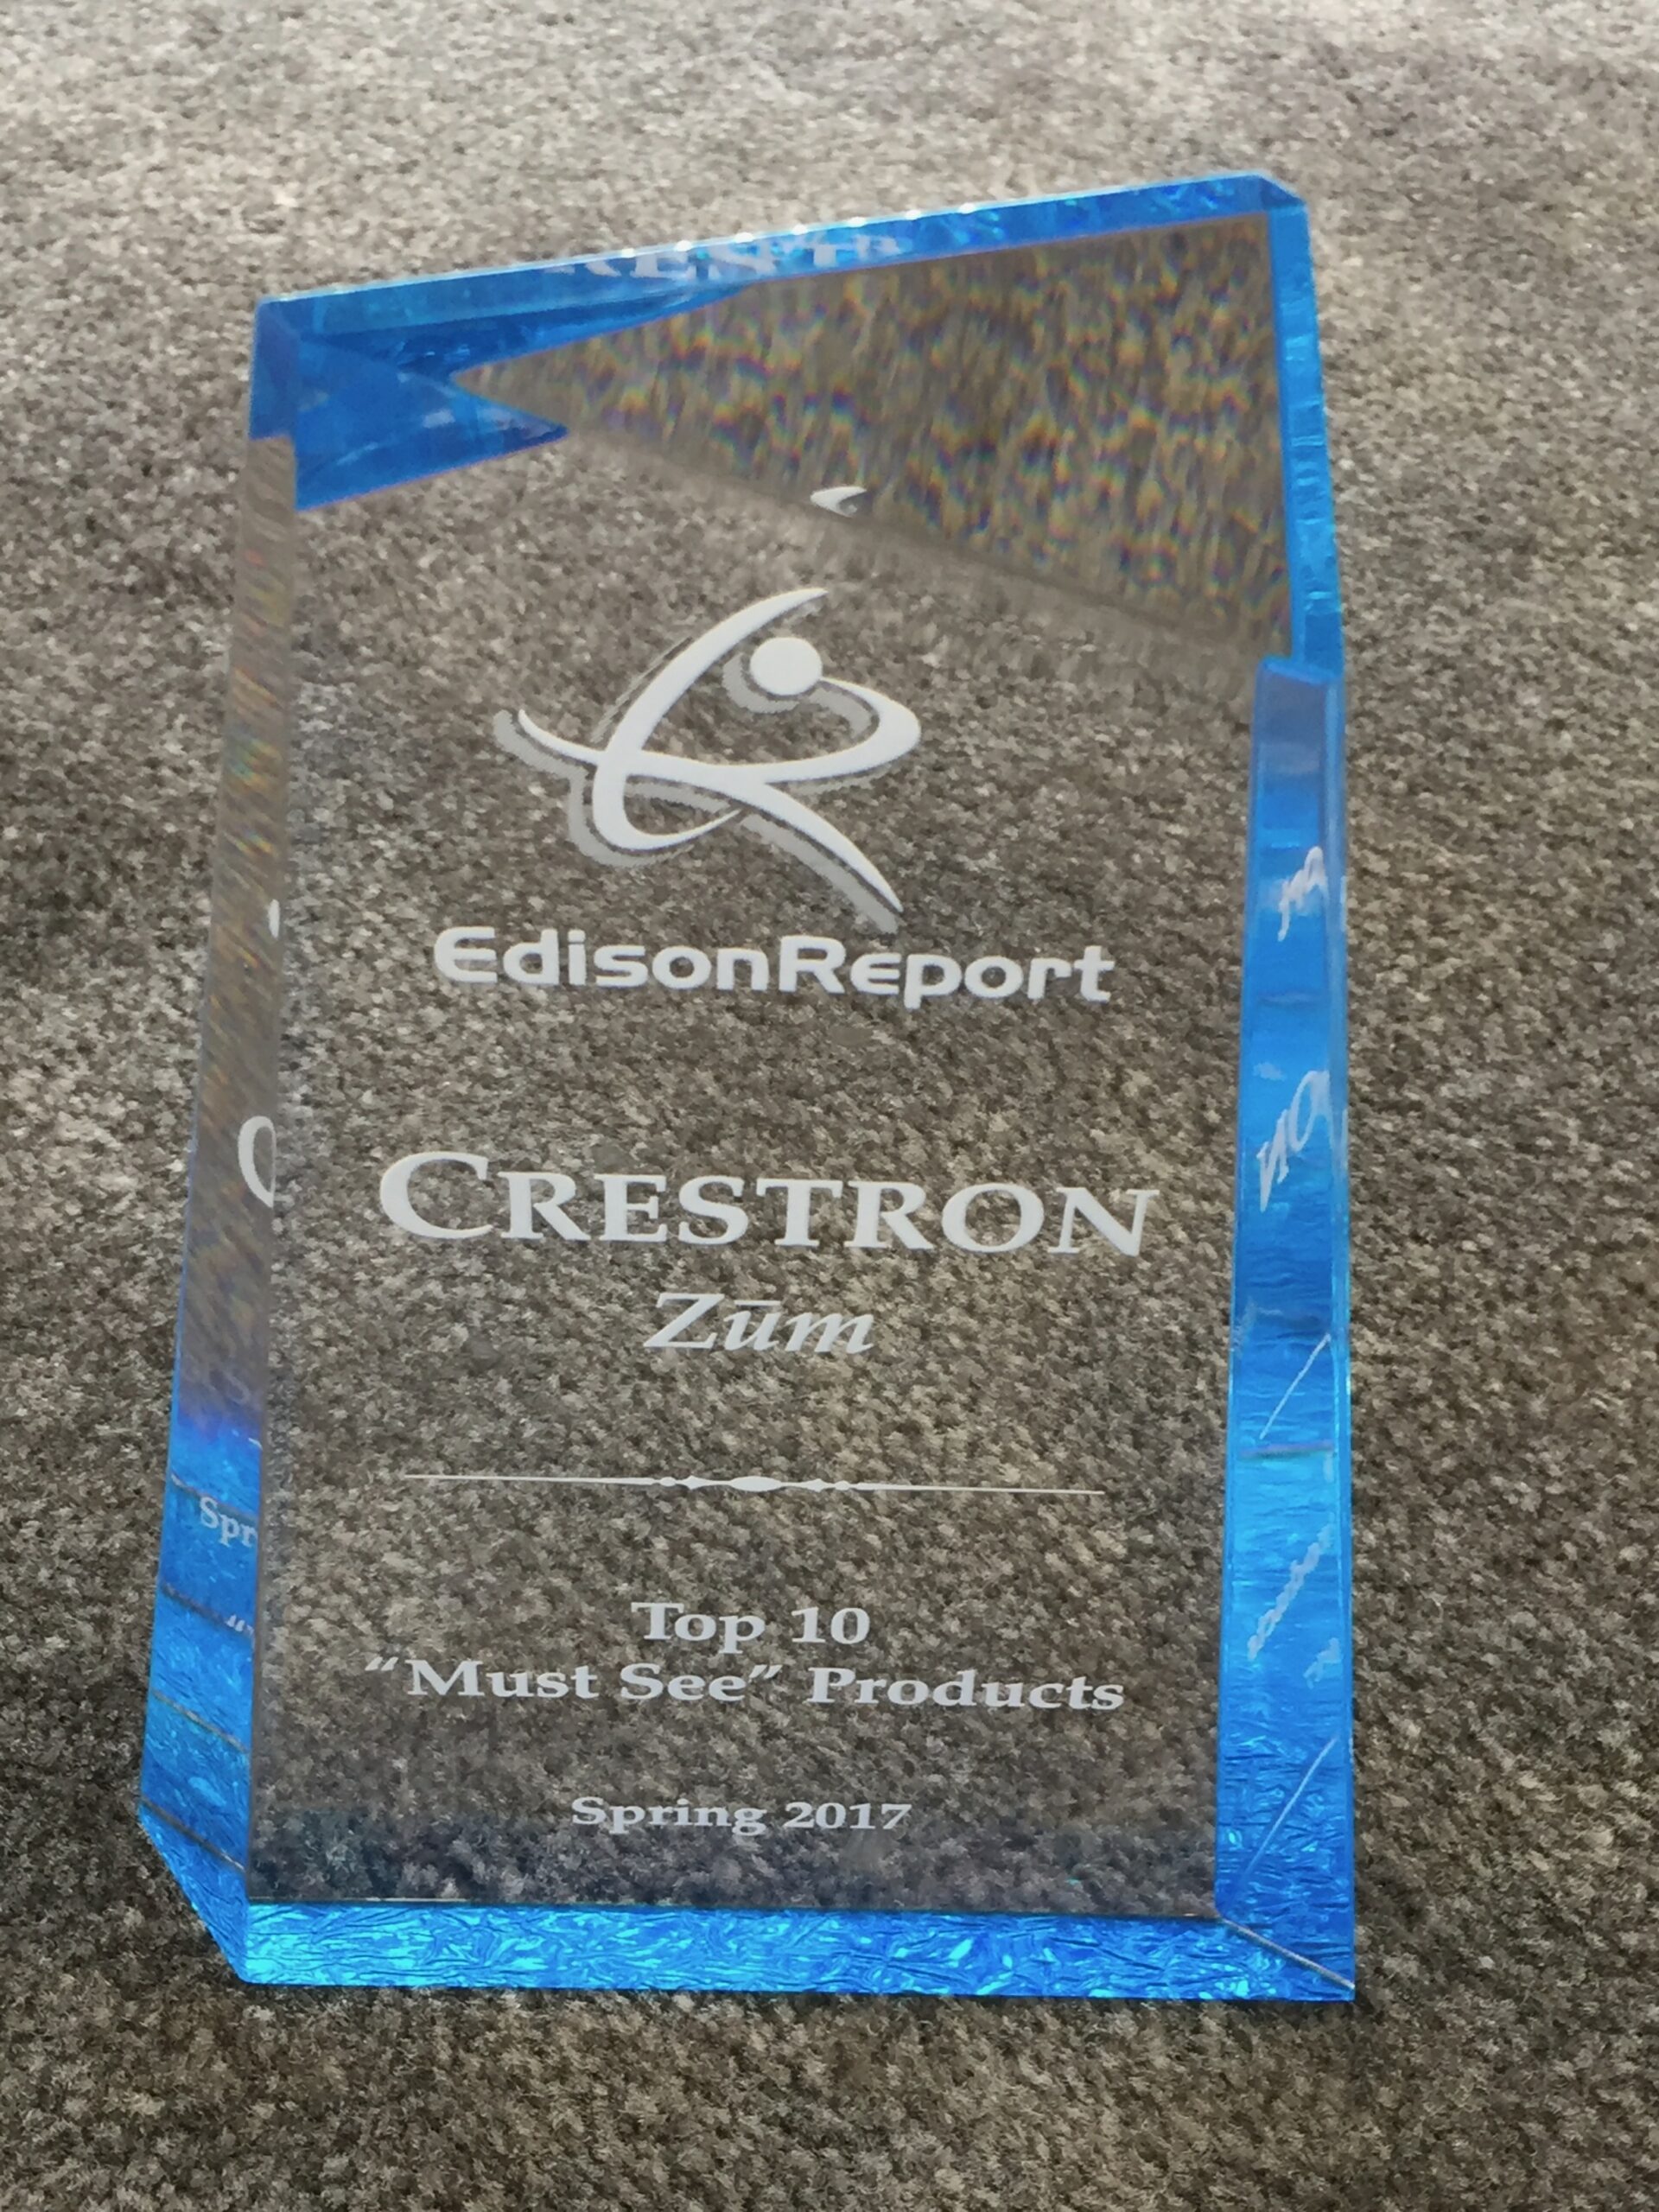 Crestron Award from EdisonReport, Top 10 MUST SEE, 2017